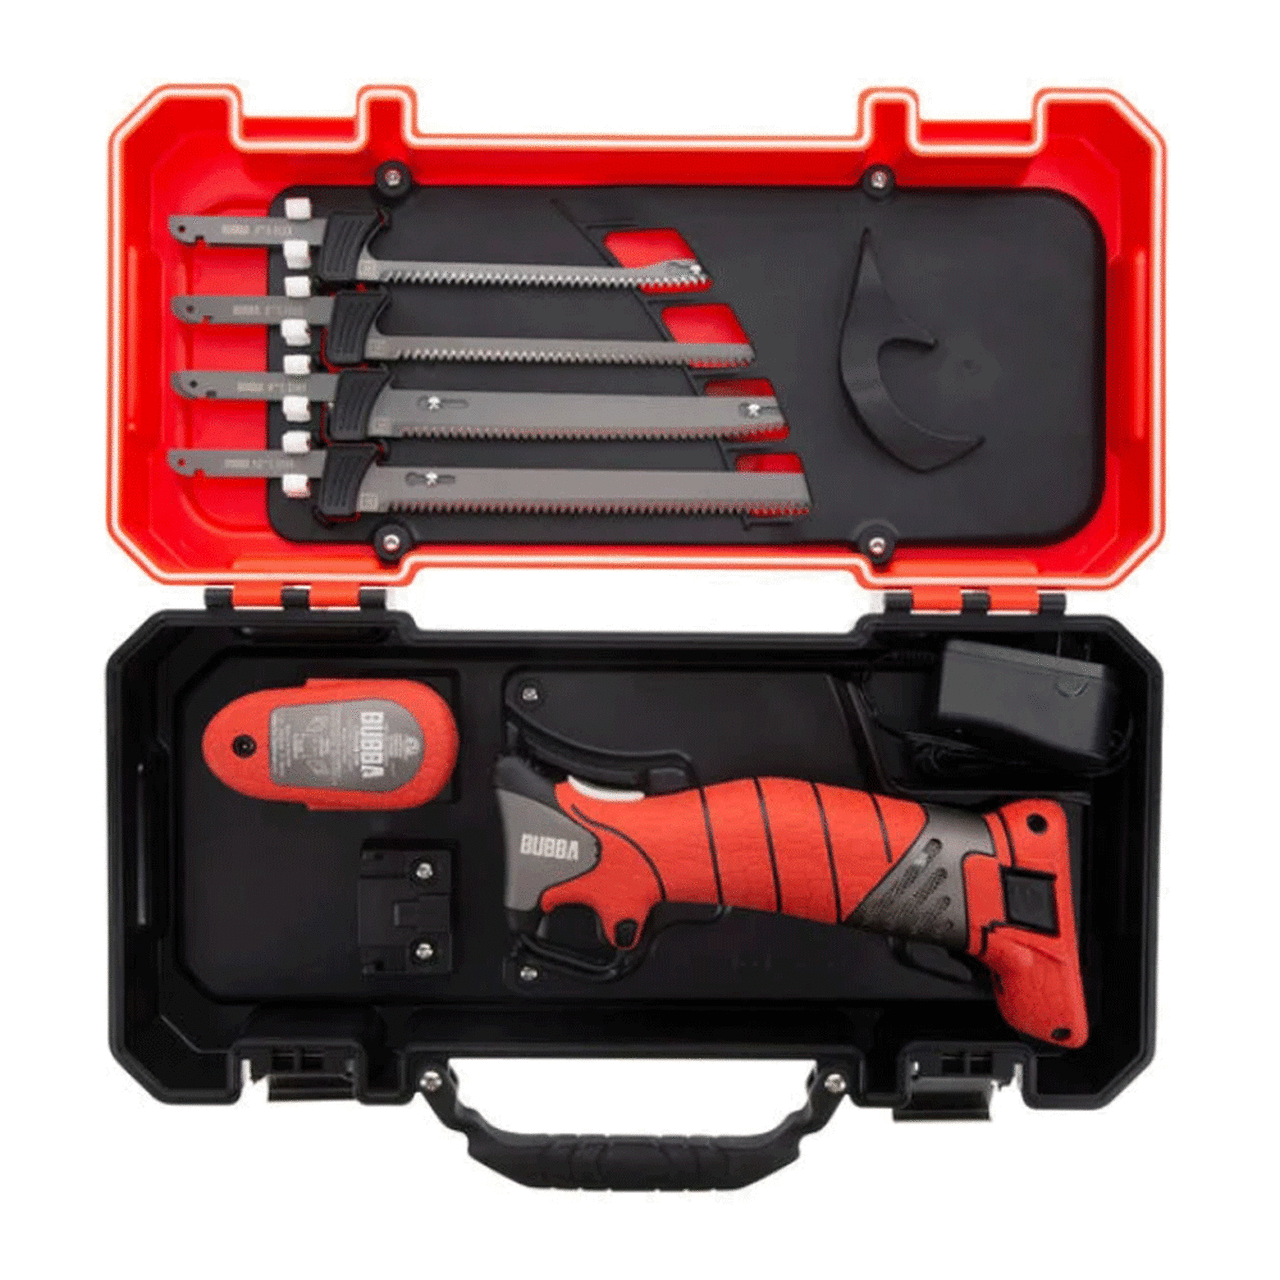 Bubba Pro Series Cordless Electric Fillet Knife 4 Blades Hard Case